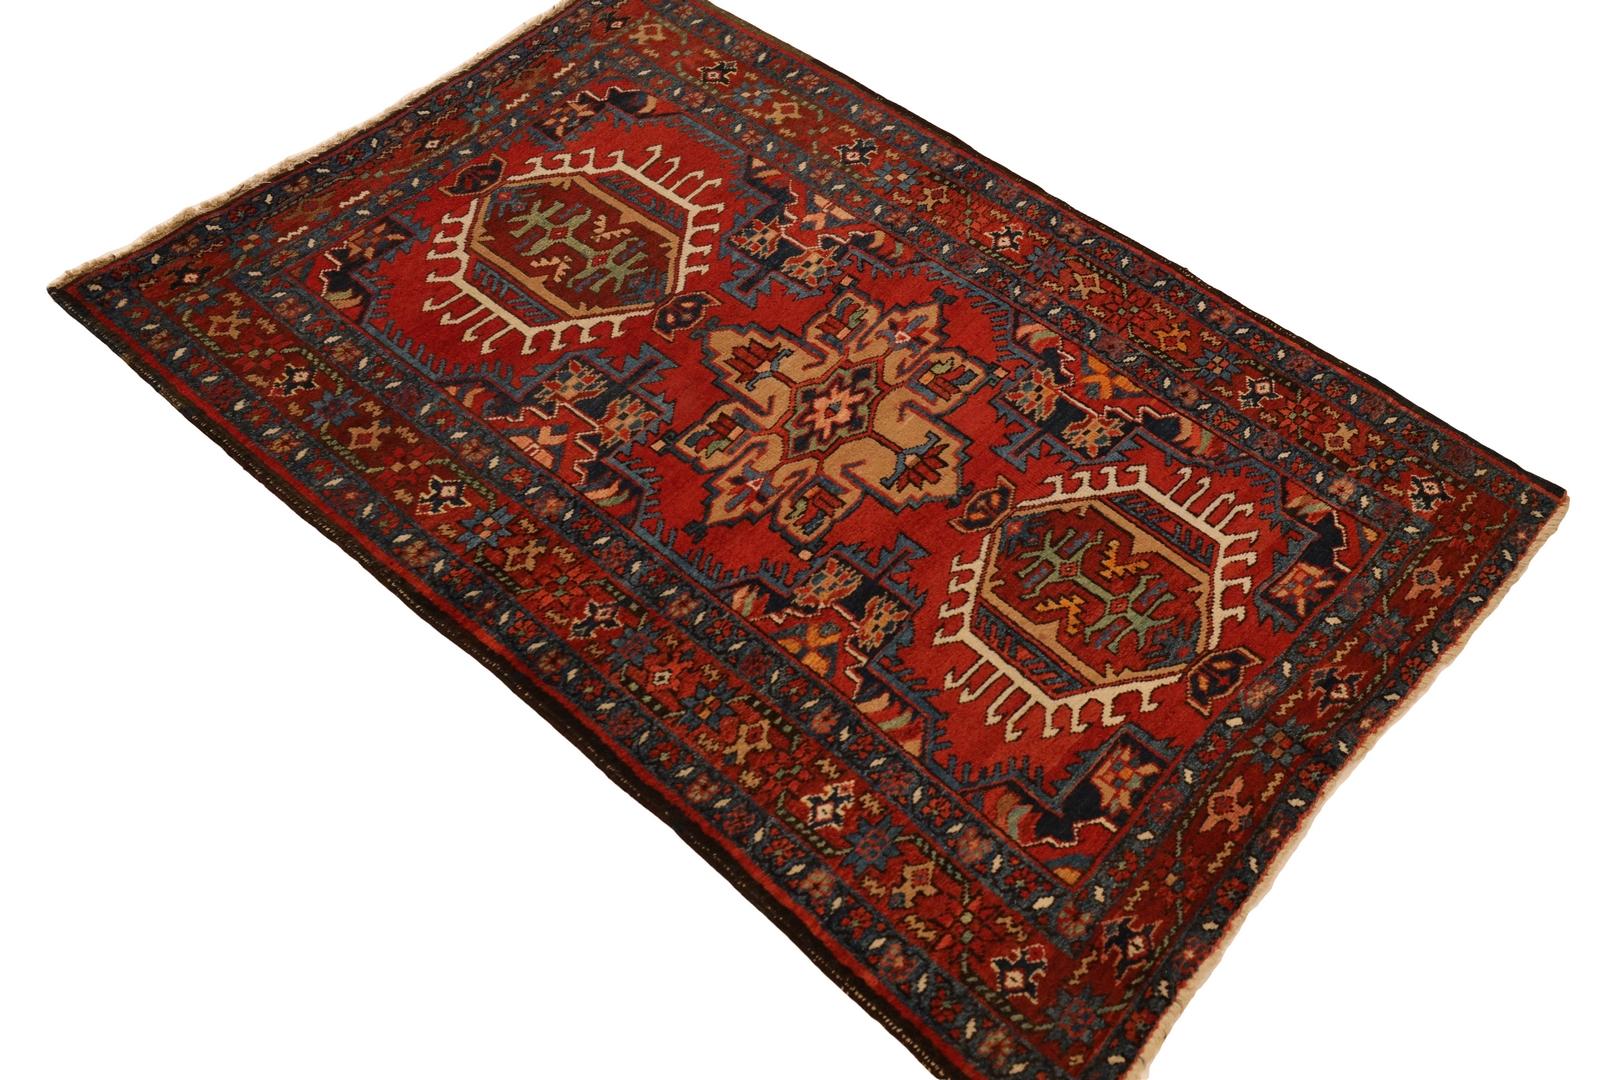 Other N.W. Persian Semi-Antique rug, Red Beige Sea-Green - 3'2